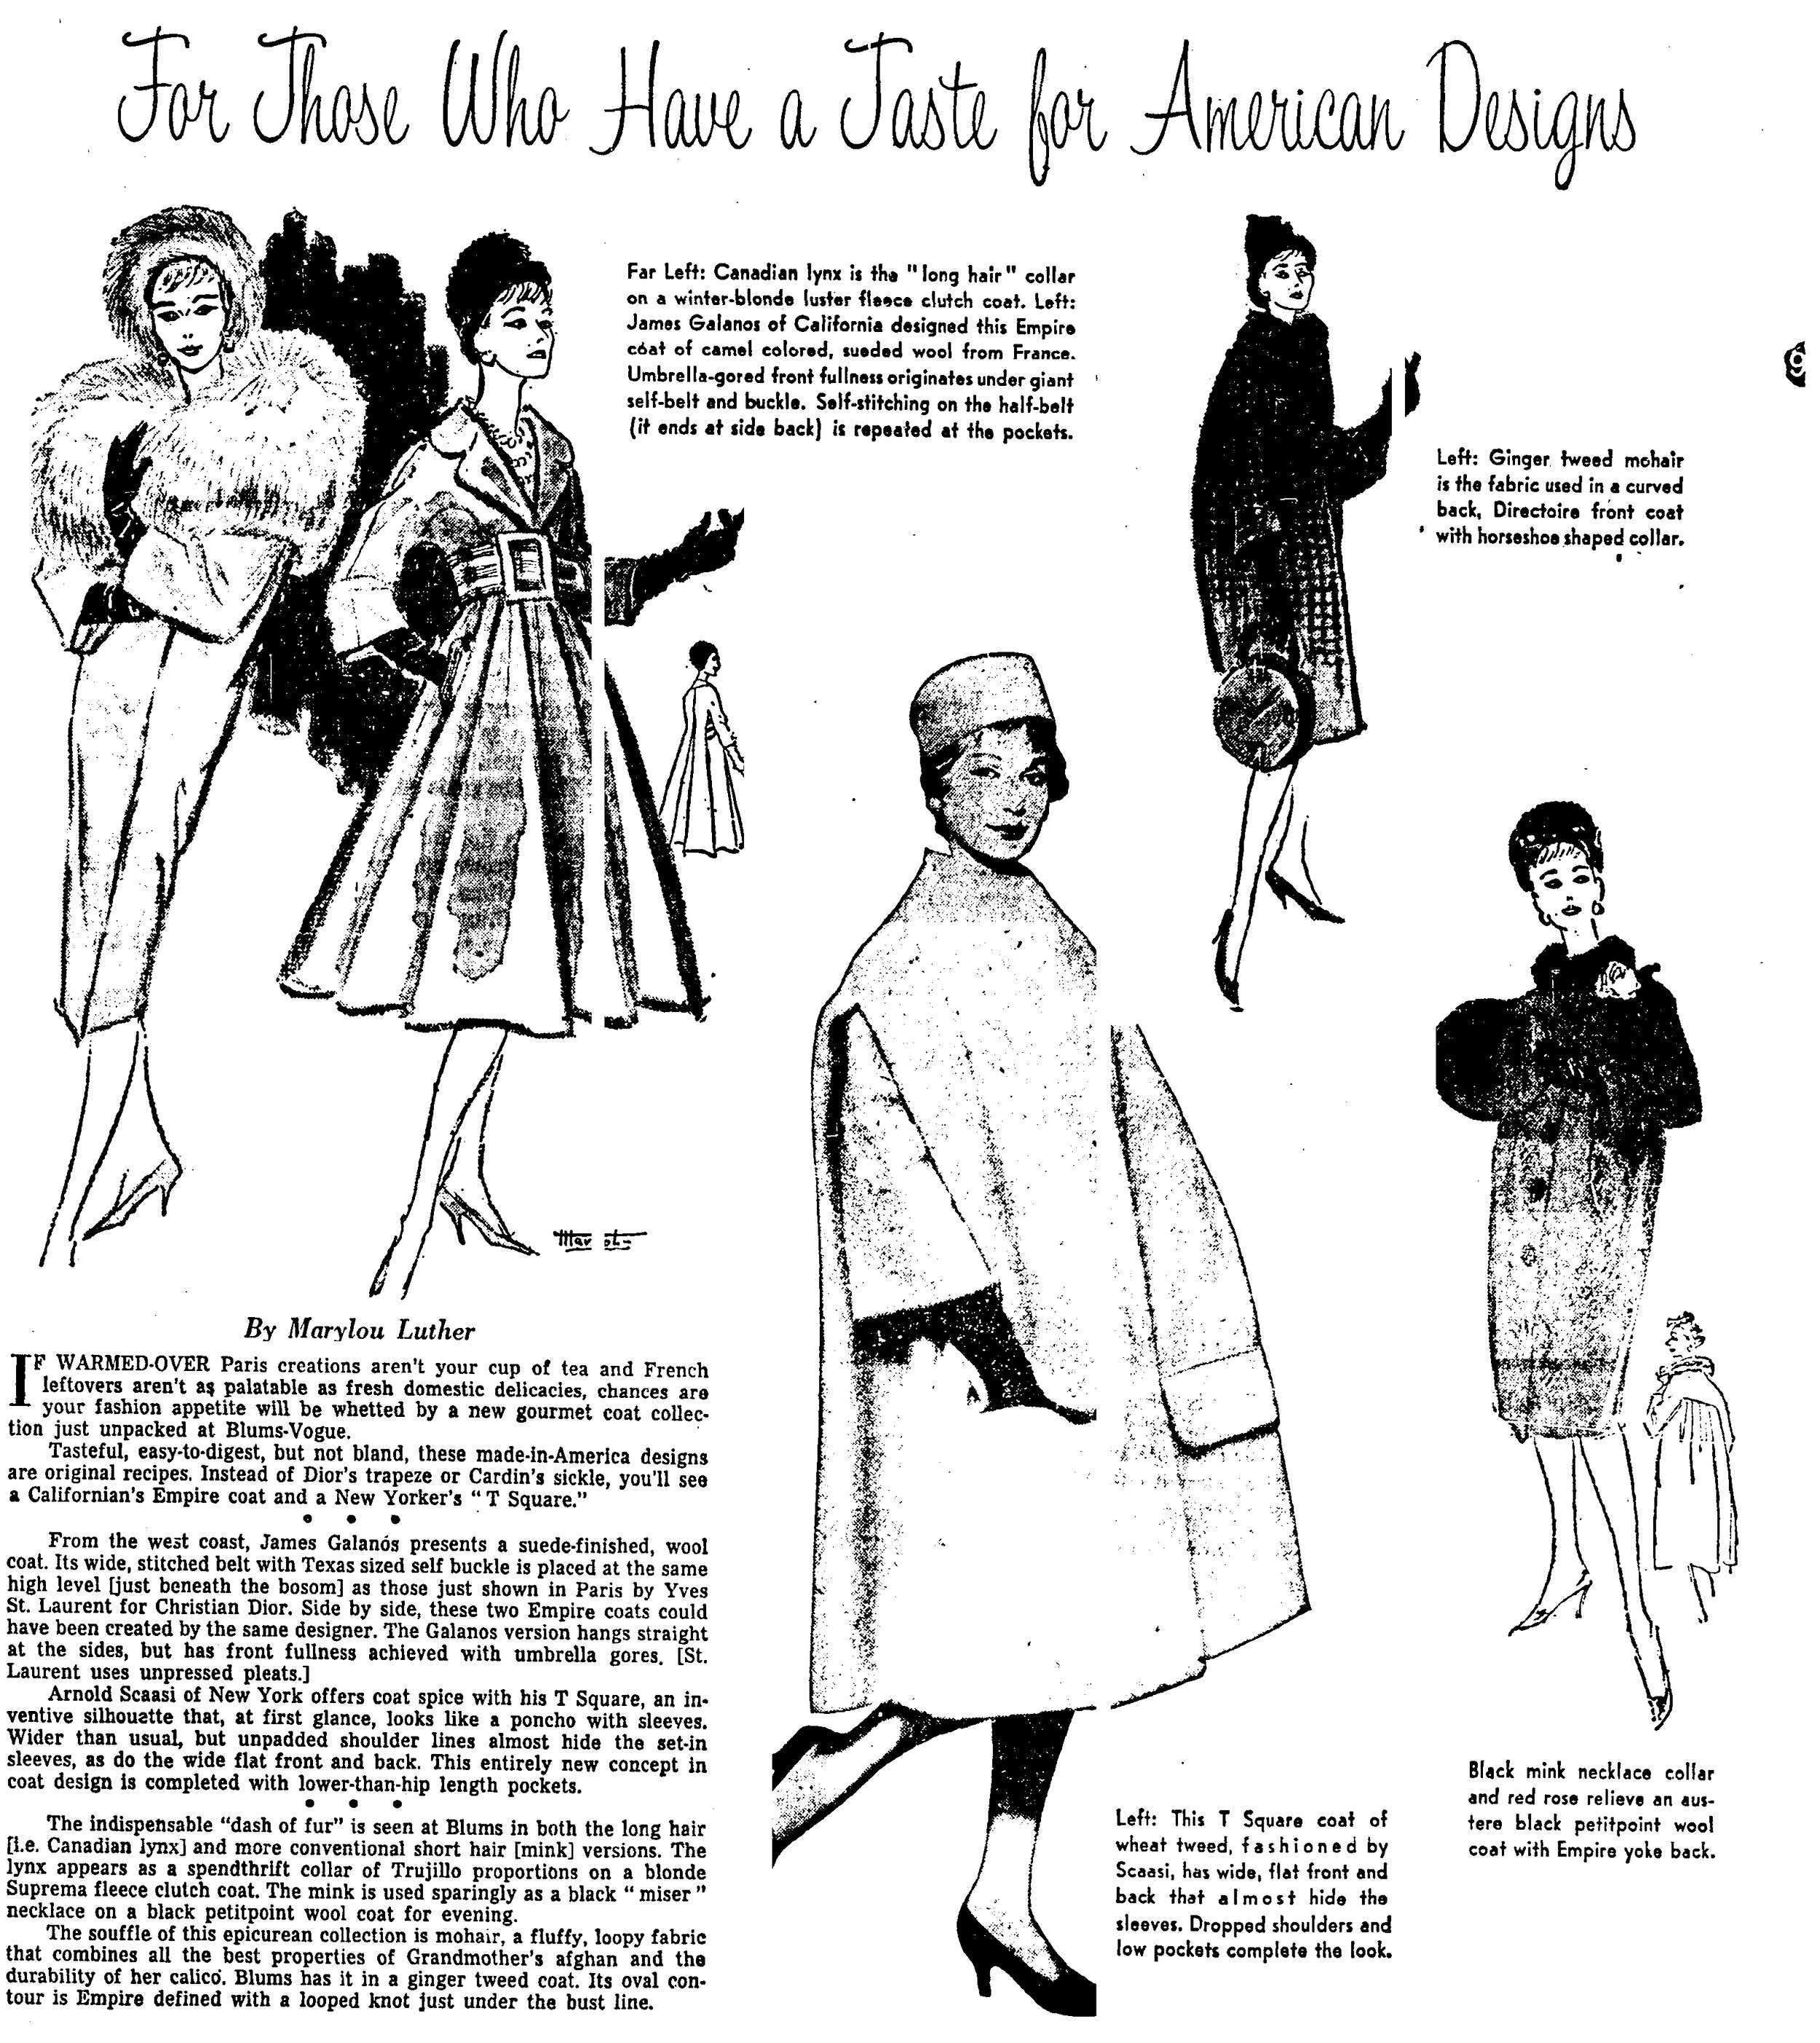 An article by Marylou for the Chicago Tribune from 1958.